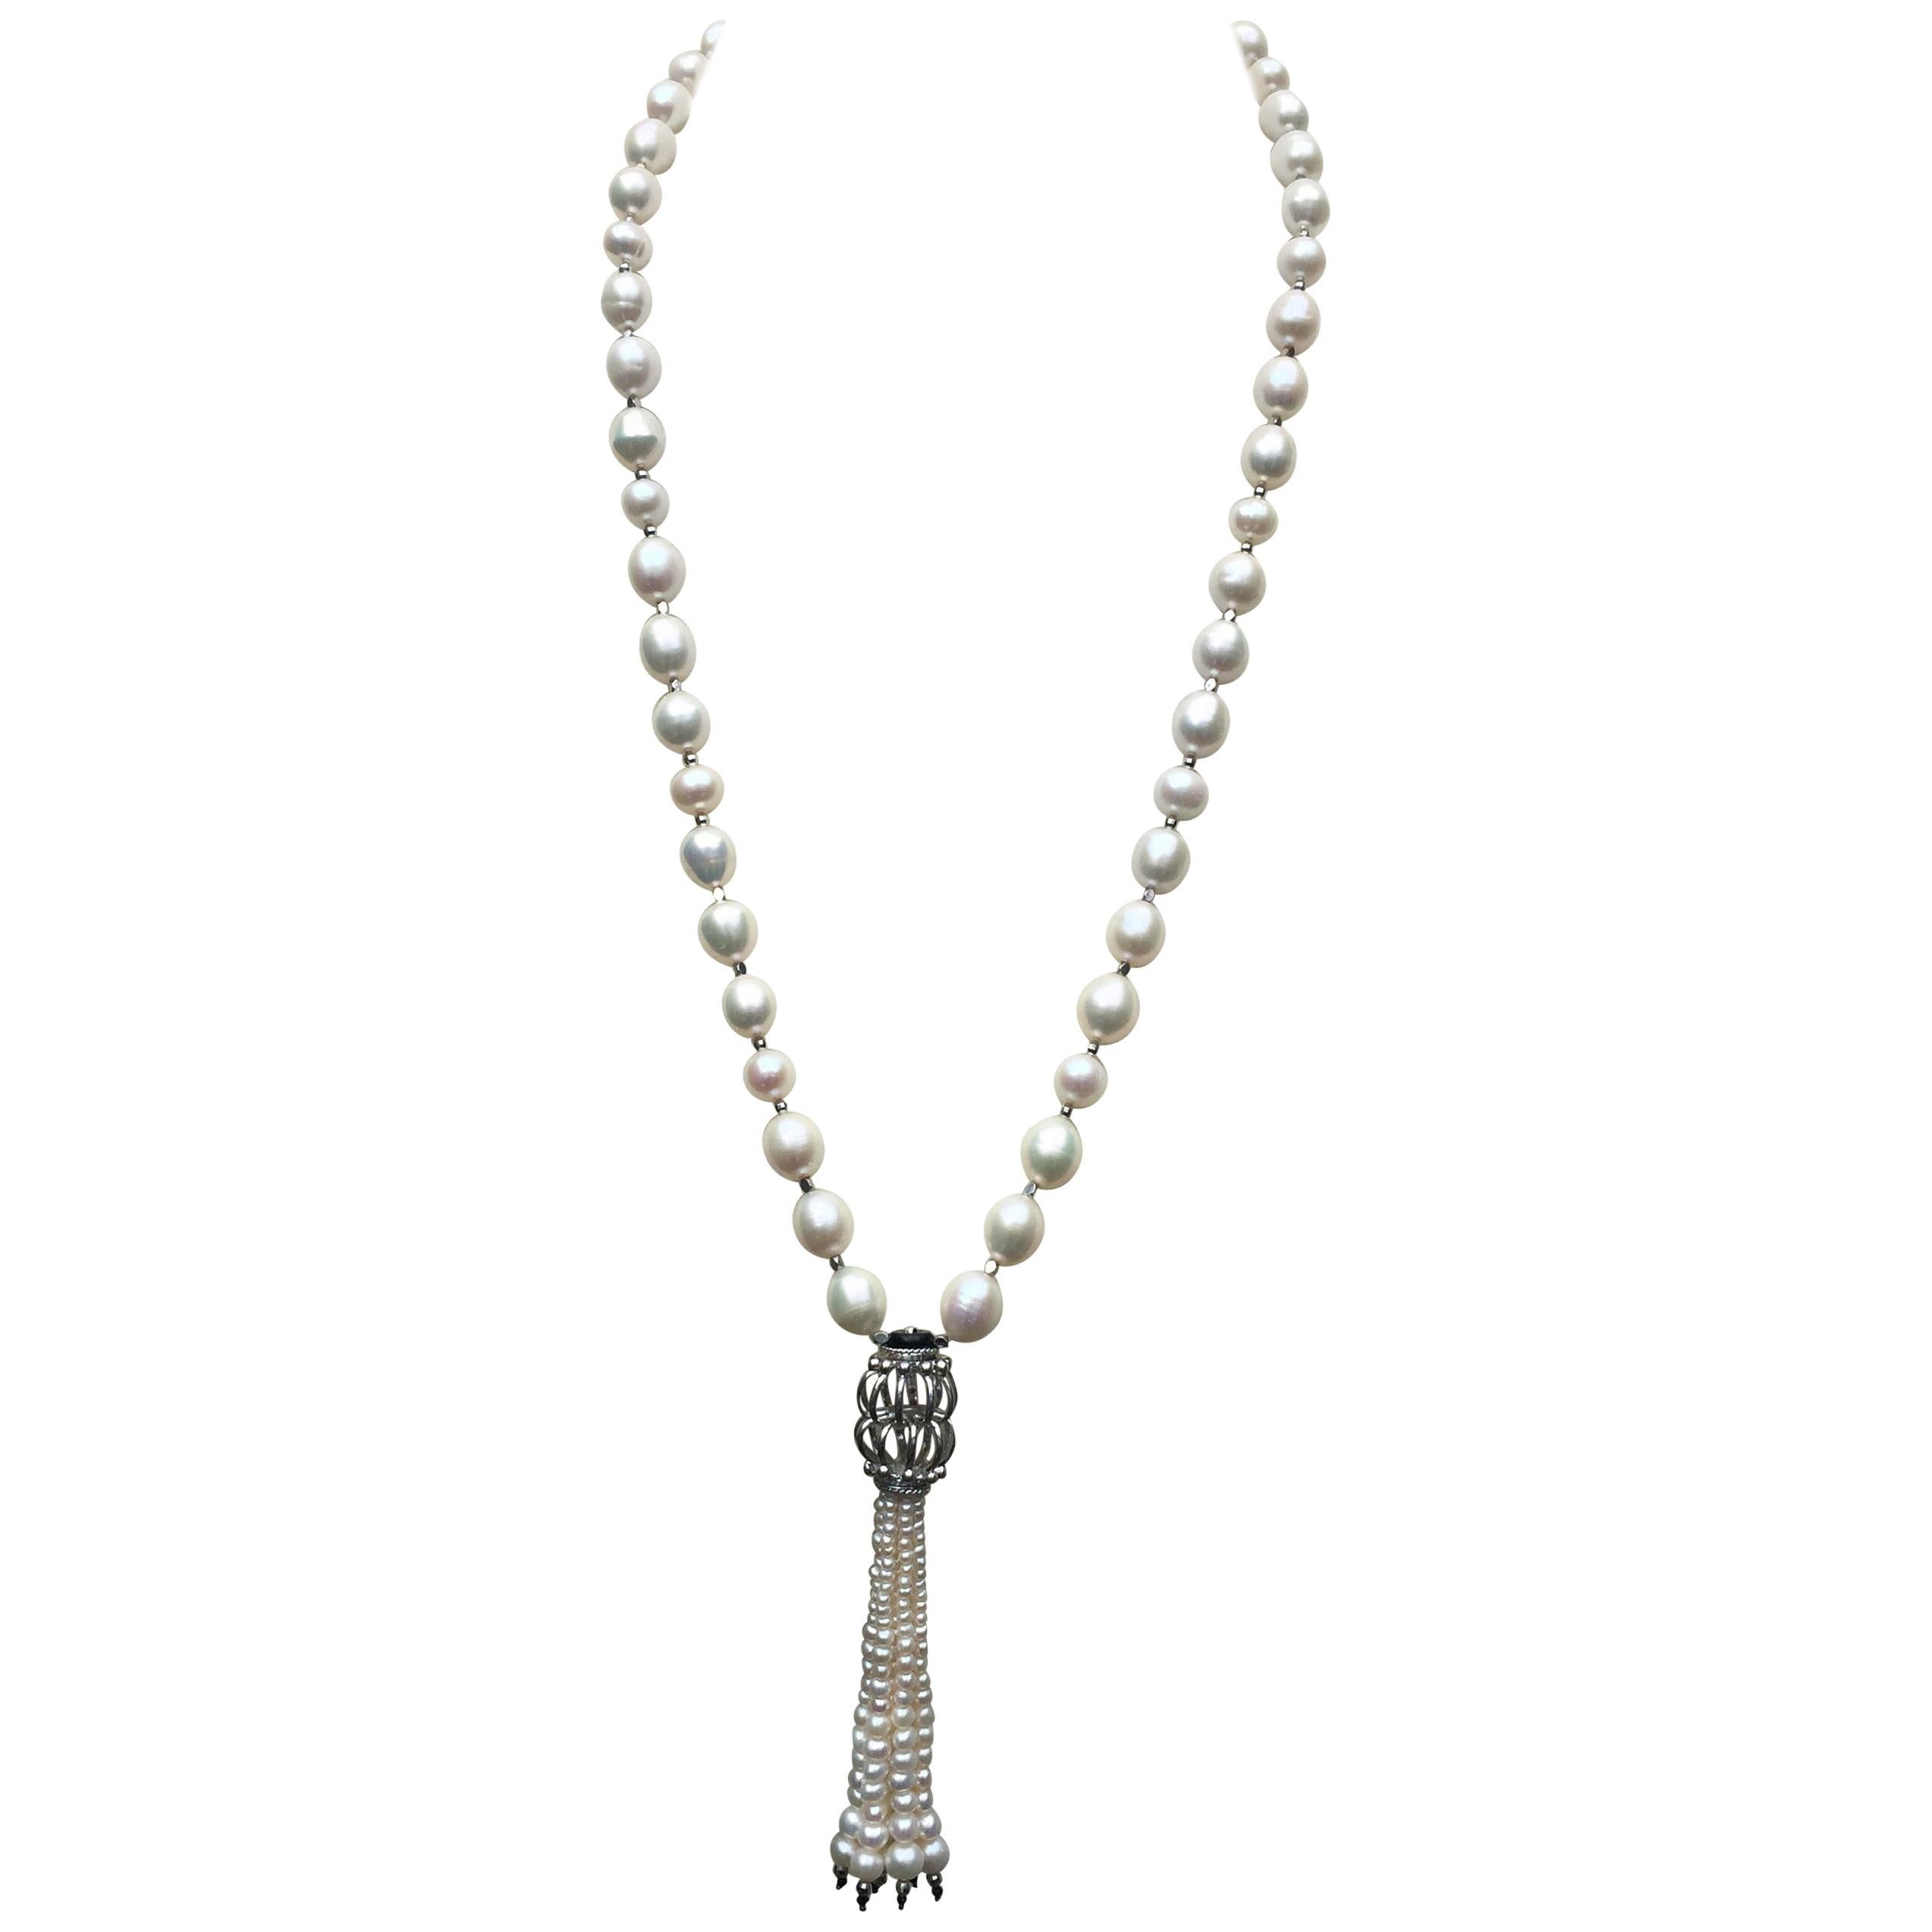 Marina J White Pearl Long Necklace with Sterling Silver Beads and Black Onyx